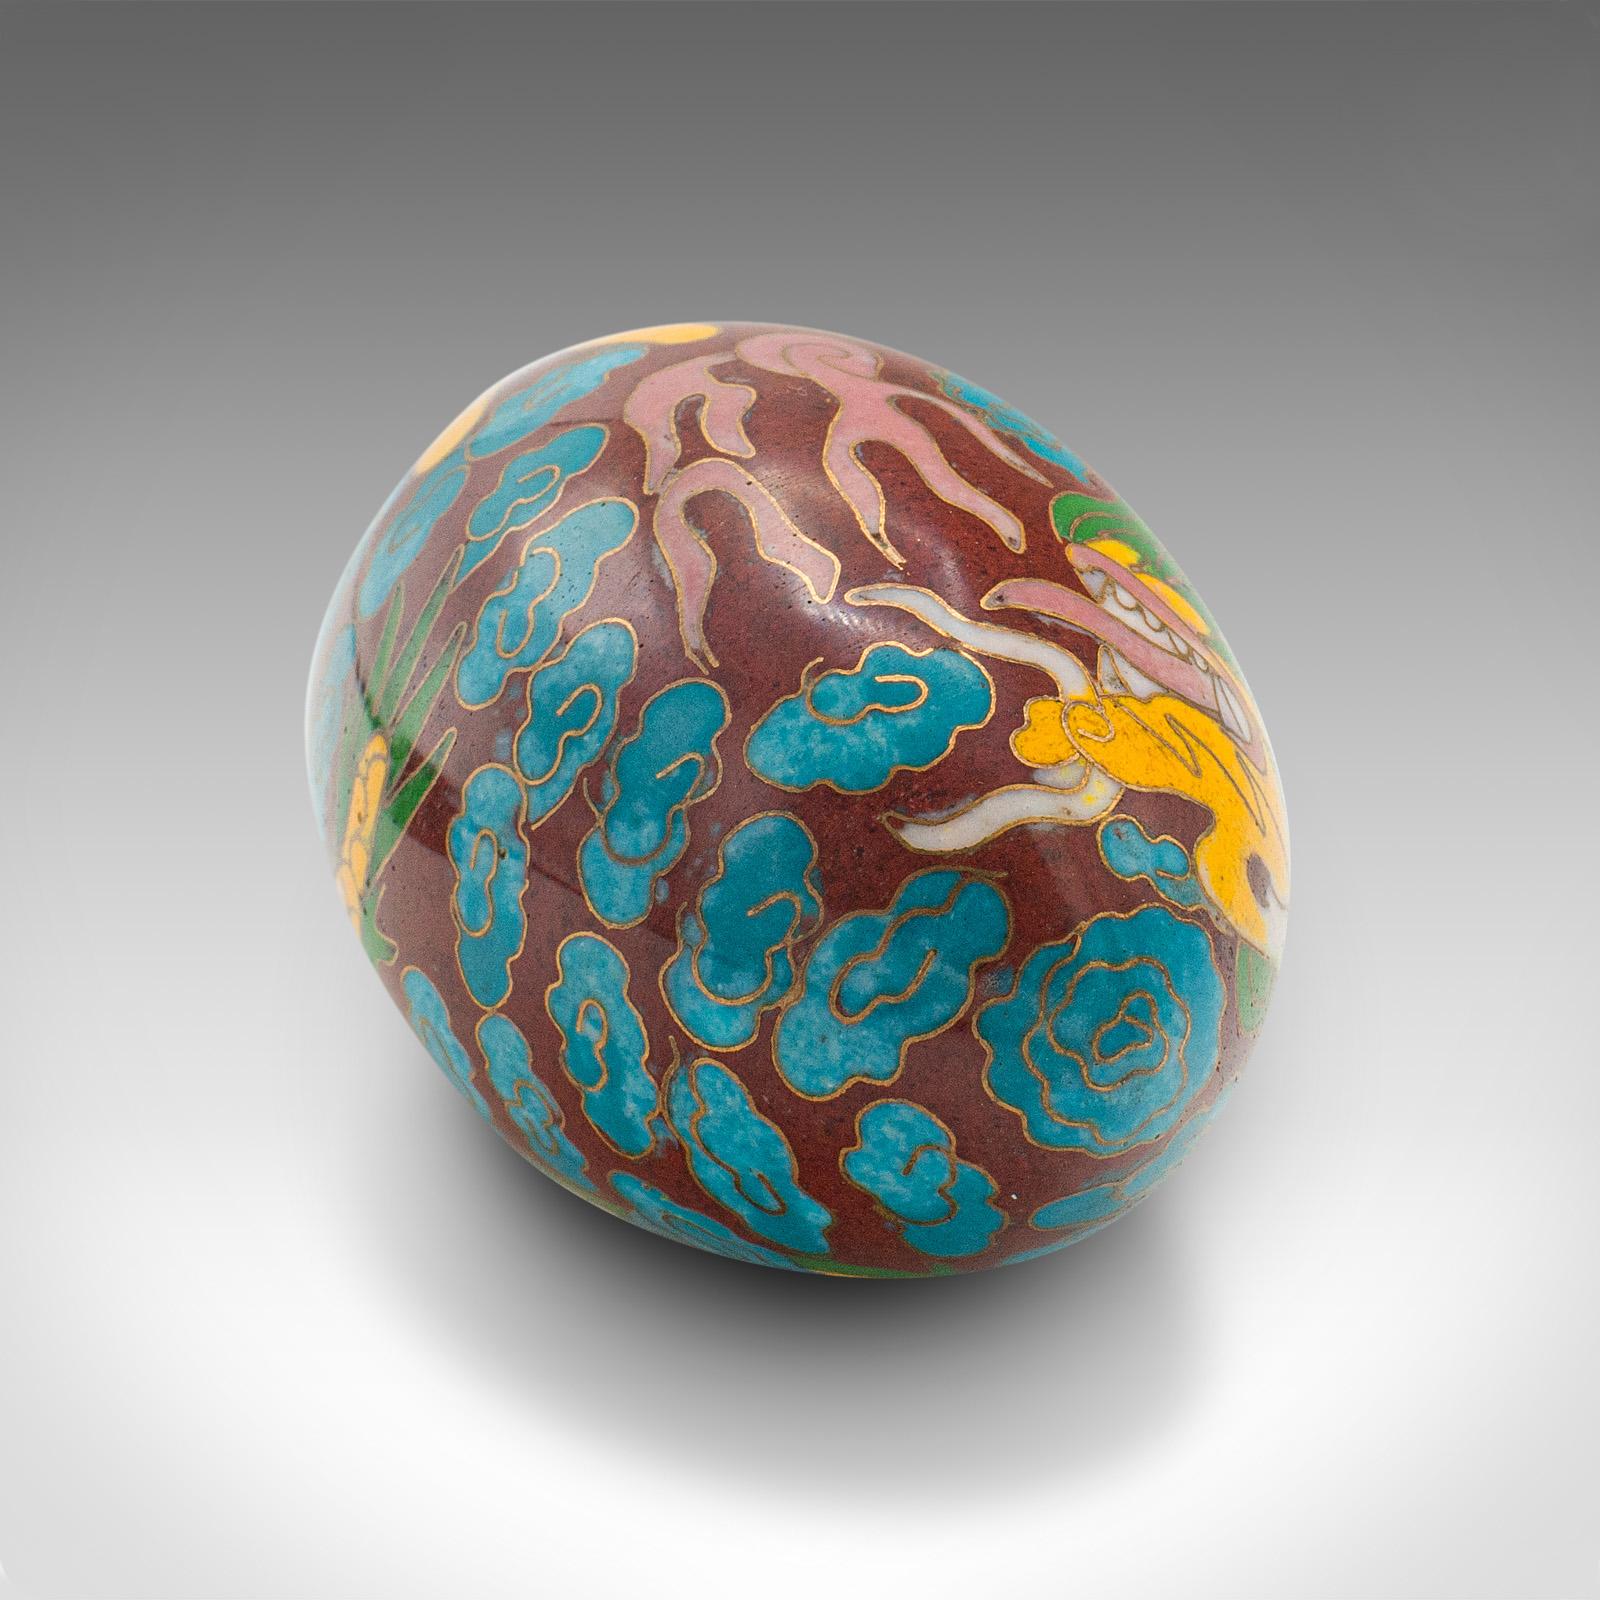 Small Vintage Cloisonne Decorative Egg, Chinese, Enamelled, Ornament, circa 1970 For Sale 5